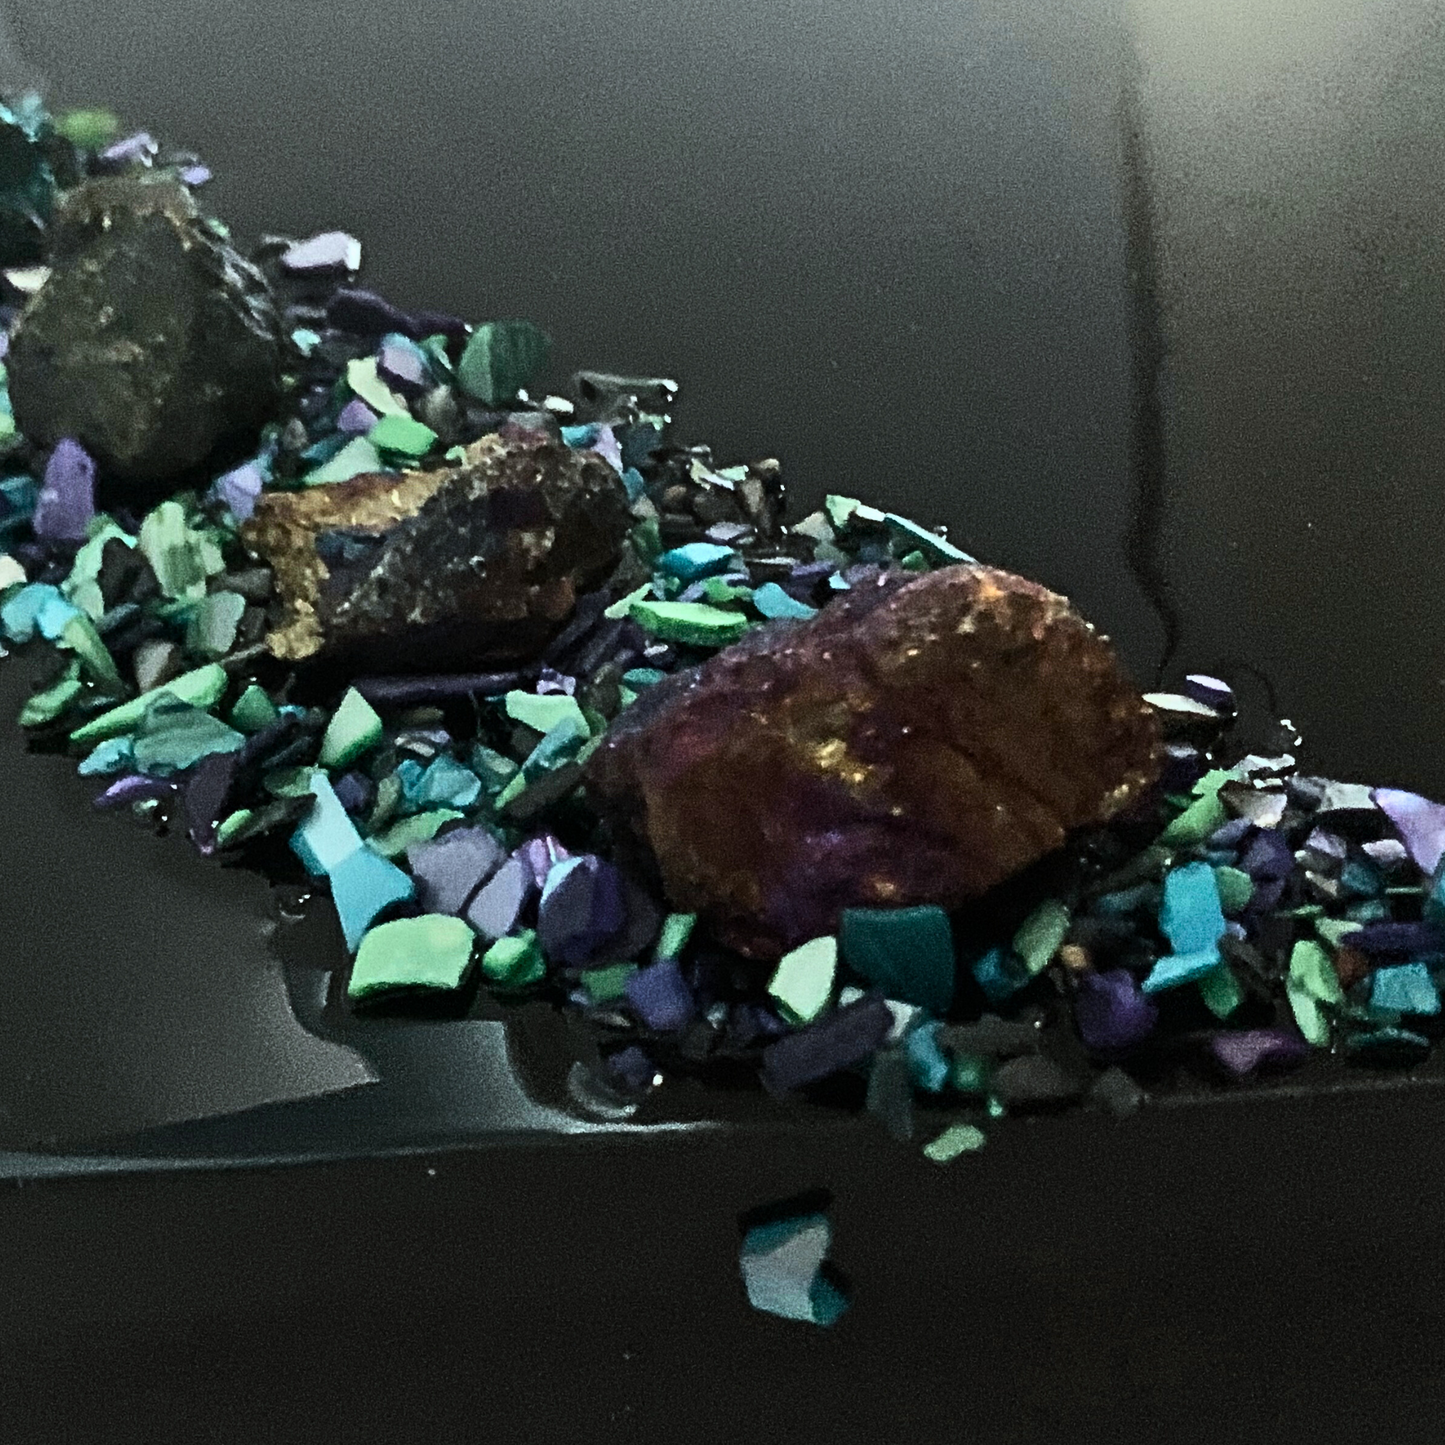 "I AM HEALING" Black Resin Art Piece with Chalcopyrite Crystals & Abalone Shells